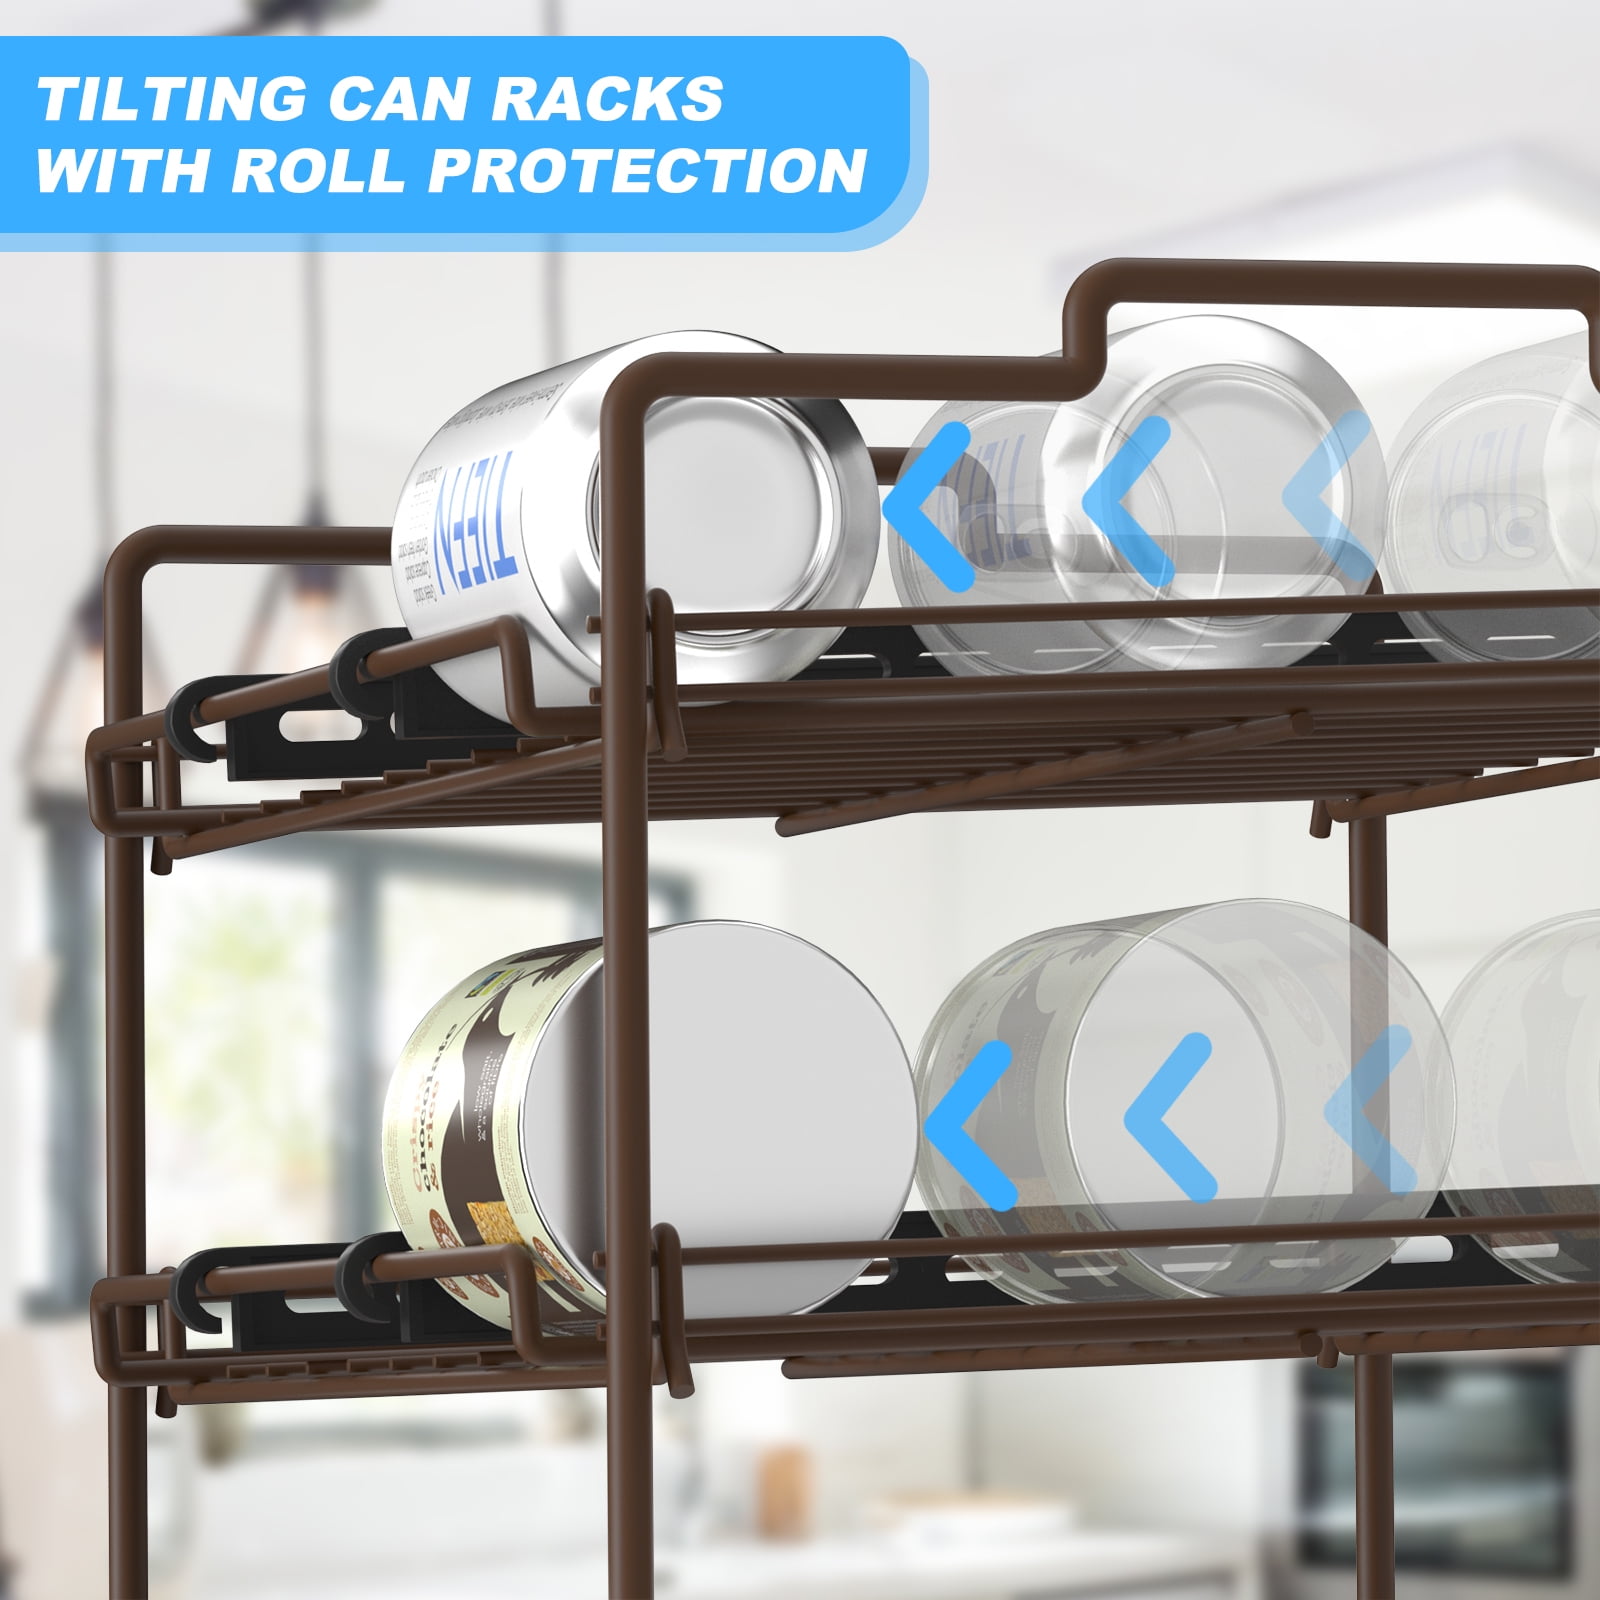 Sulishang 4 Tiers Stackable Can Rack Organizer, Wear-resistant Holds Up to 48 Cans for Kitchen Cabinet and Pantry, Stainless Steel (Silver)